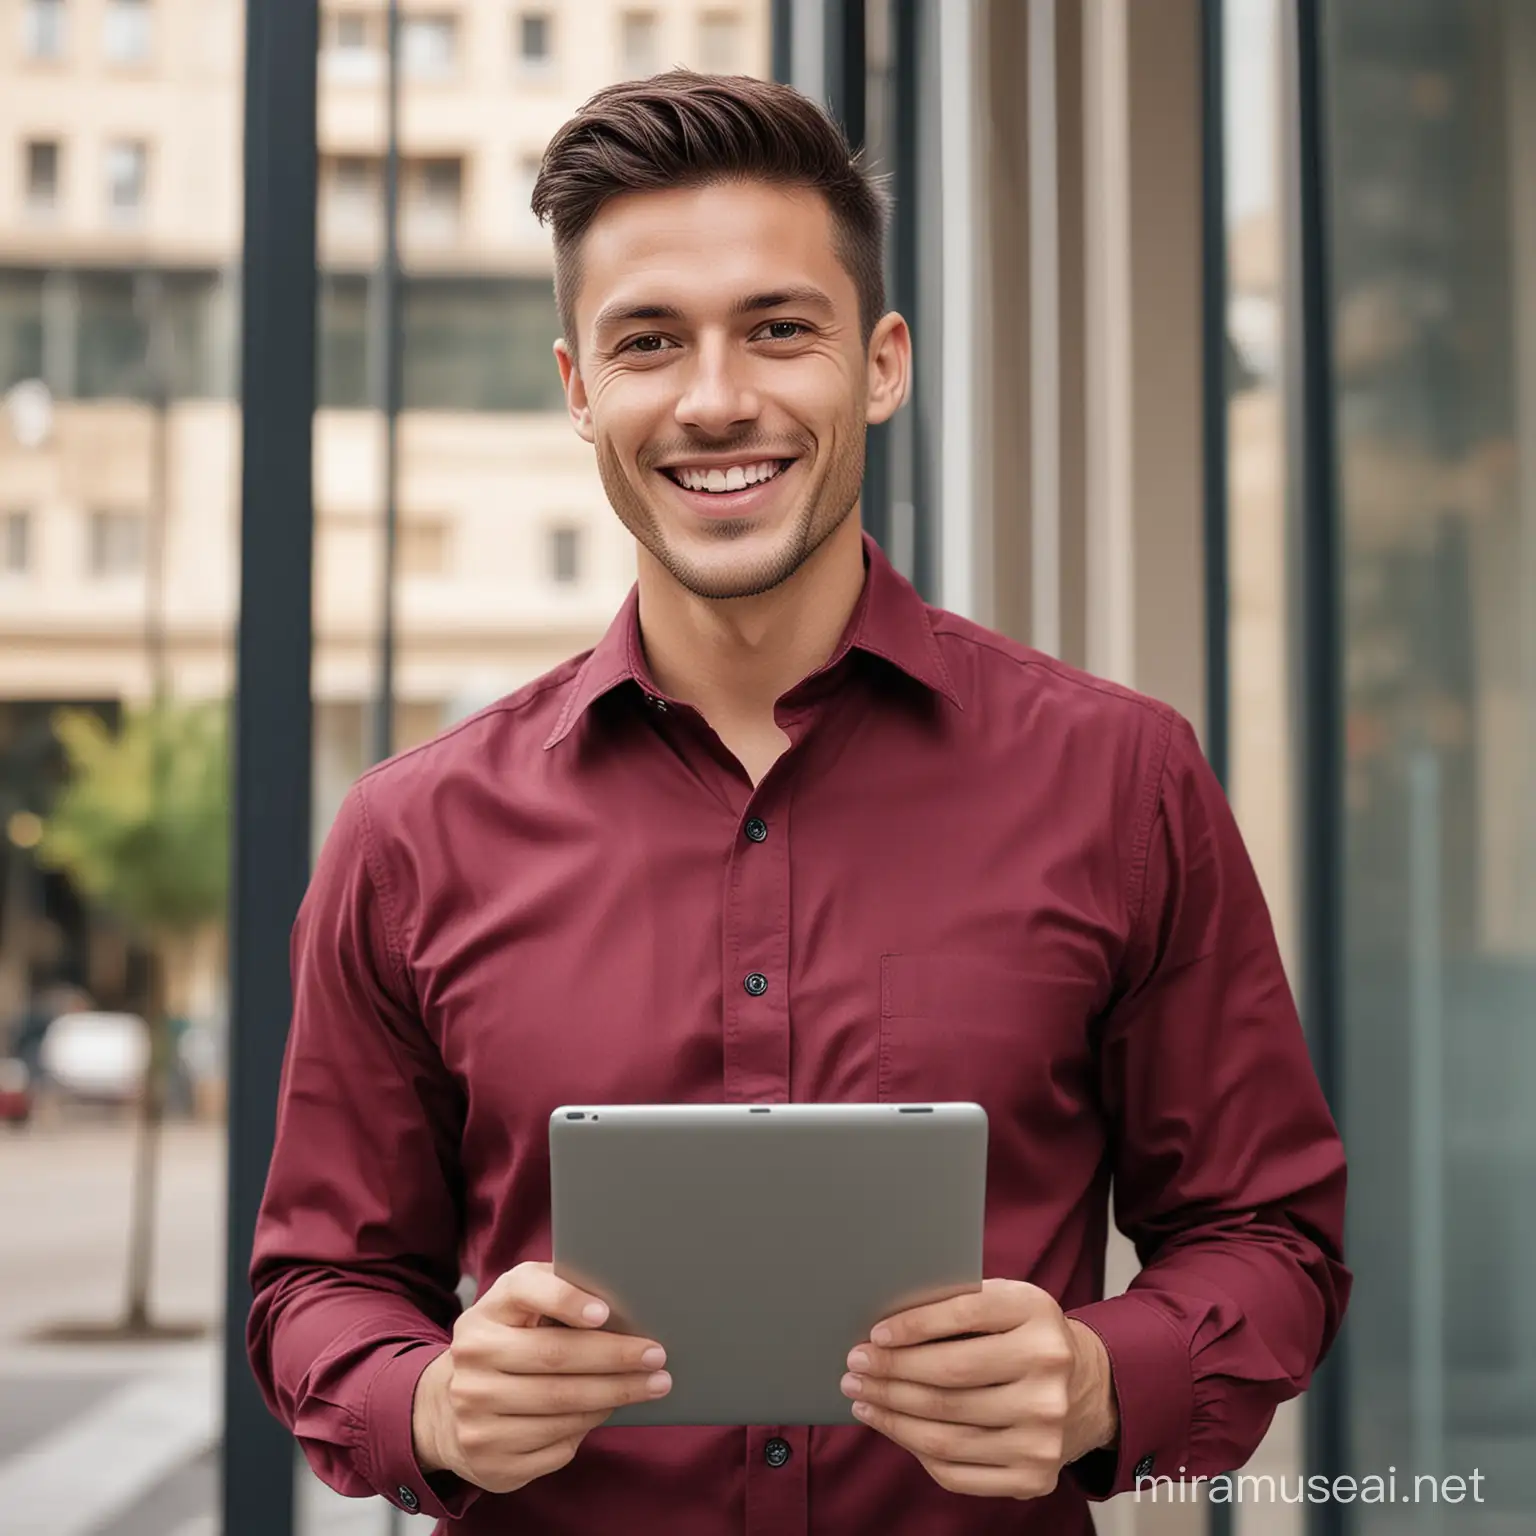 Cheerful Man in Maroon Shirt Using Tablet Outdoors After Work